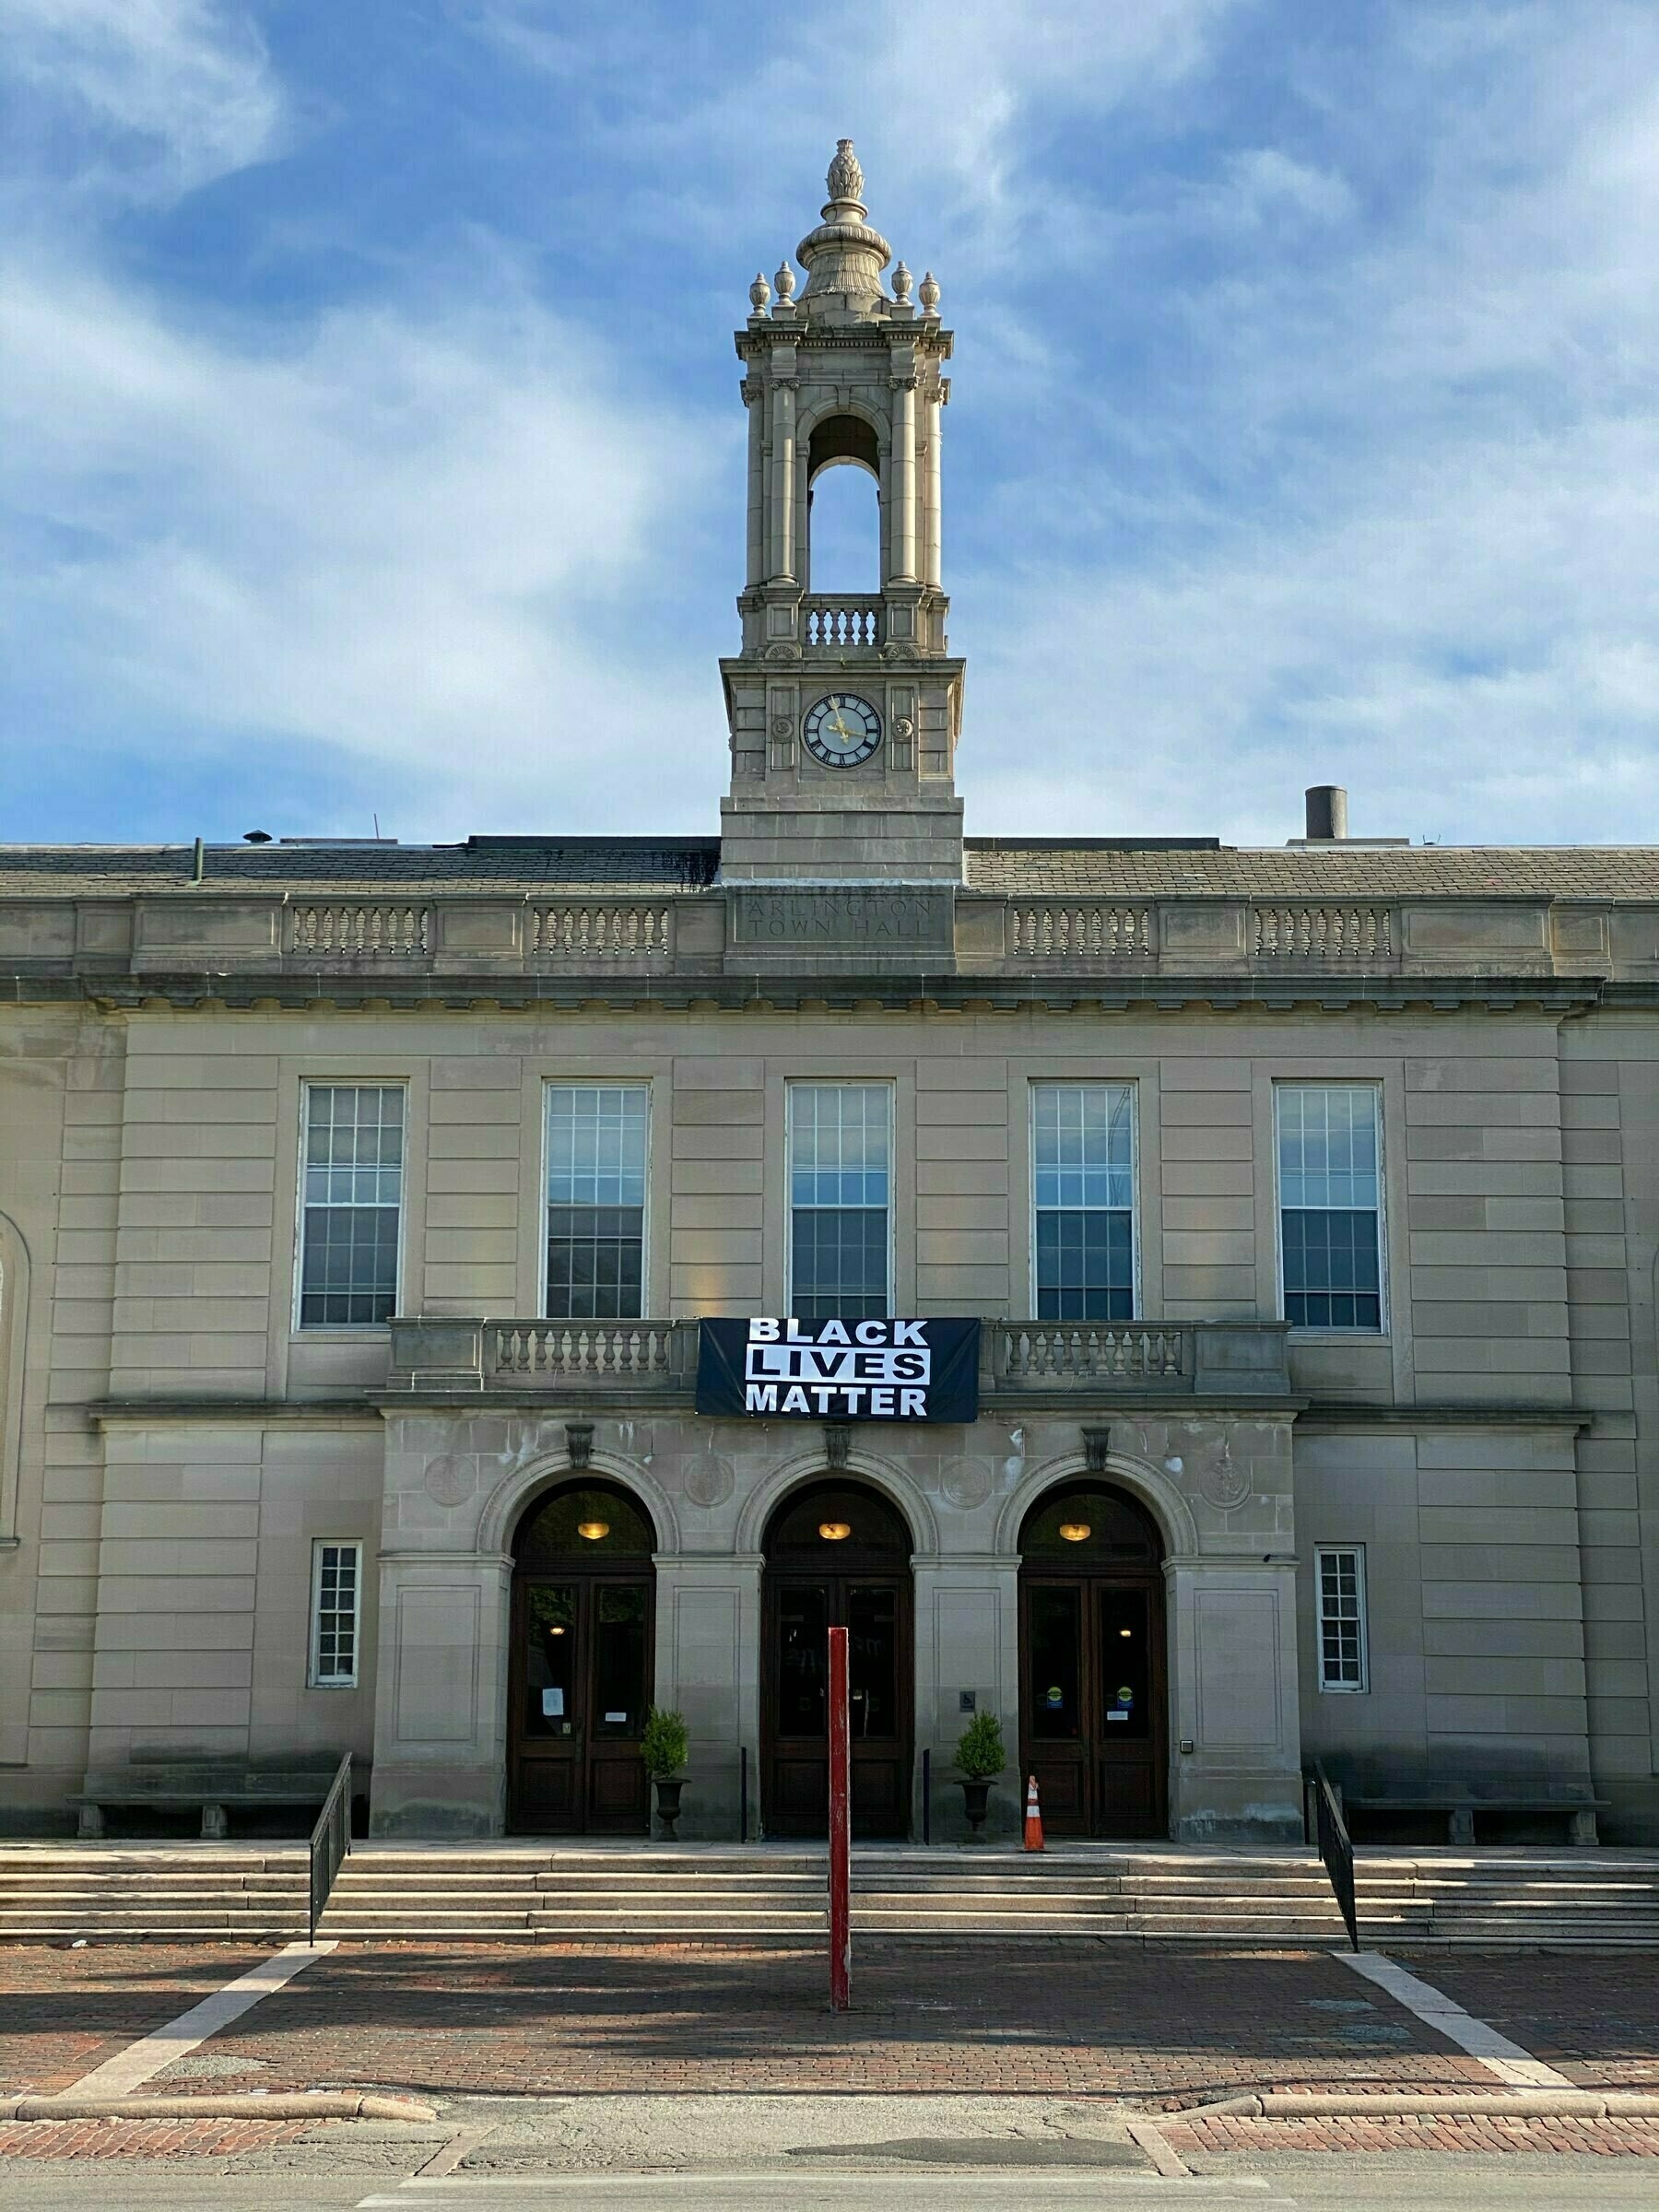 picture of arlington town hall building with a Black Lives Matter banner hanging from it